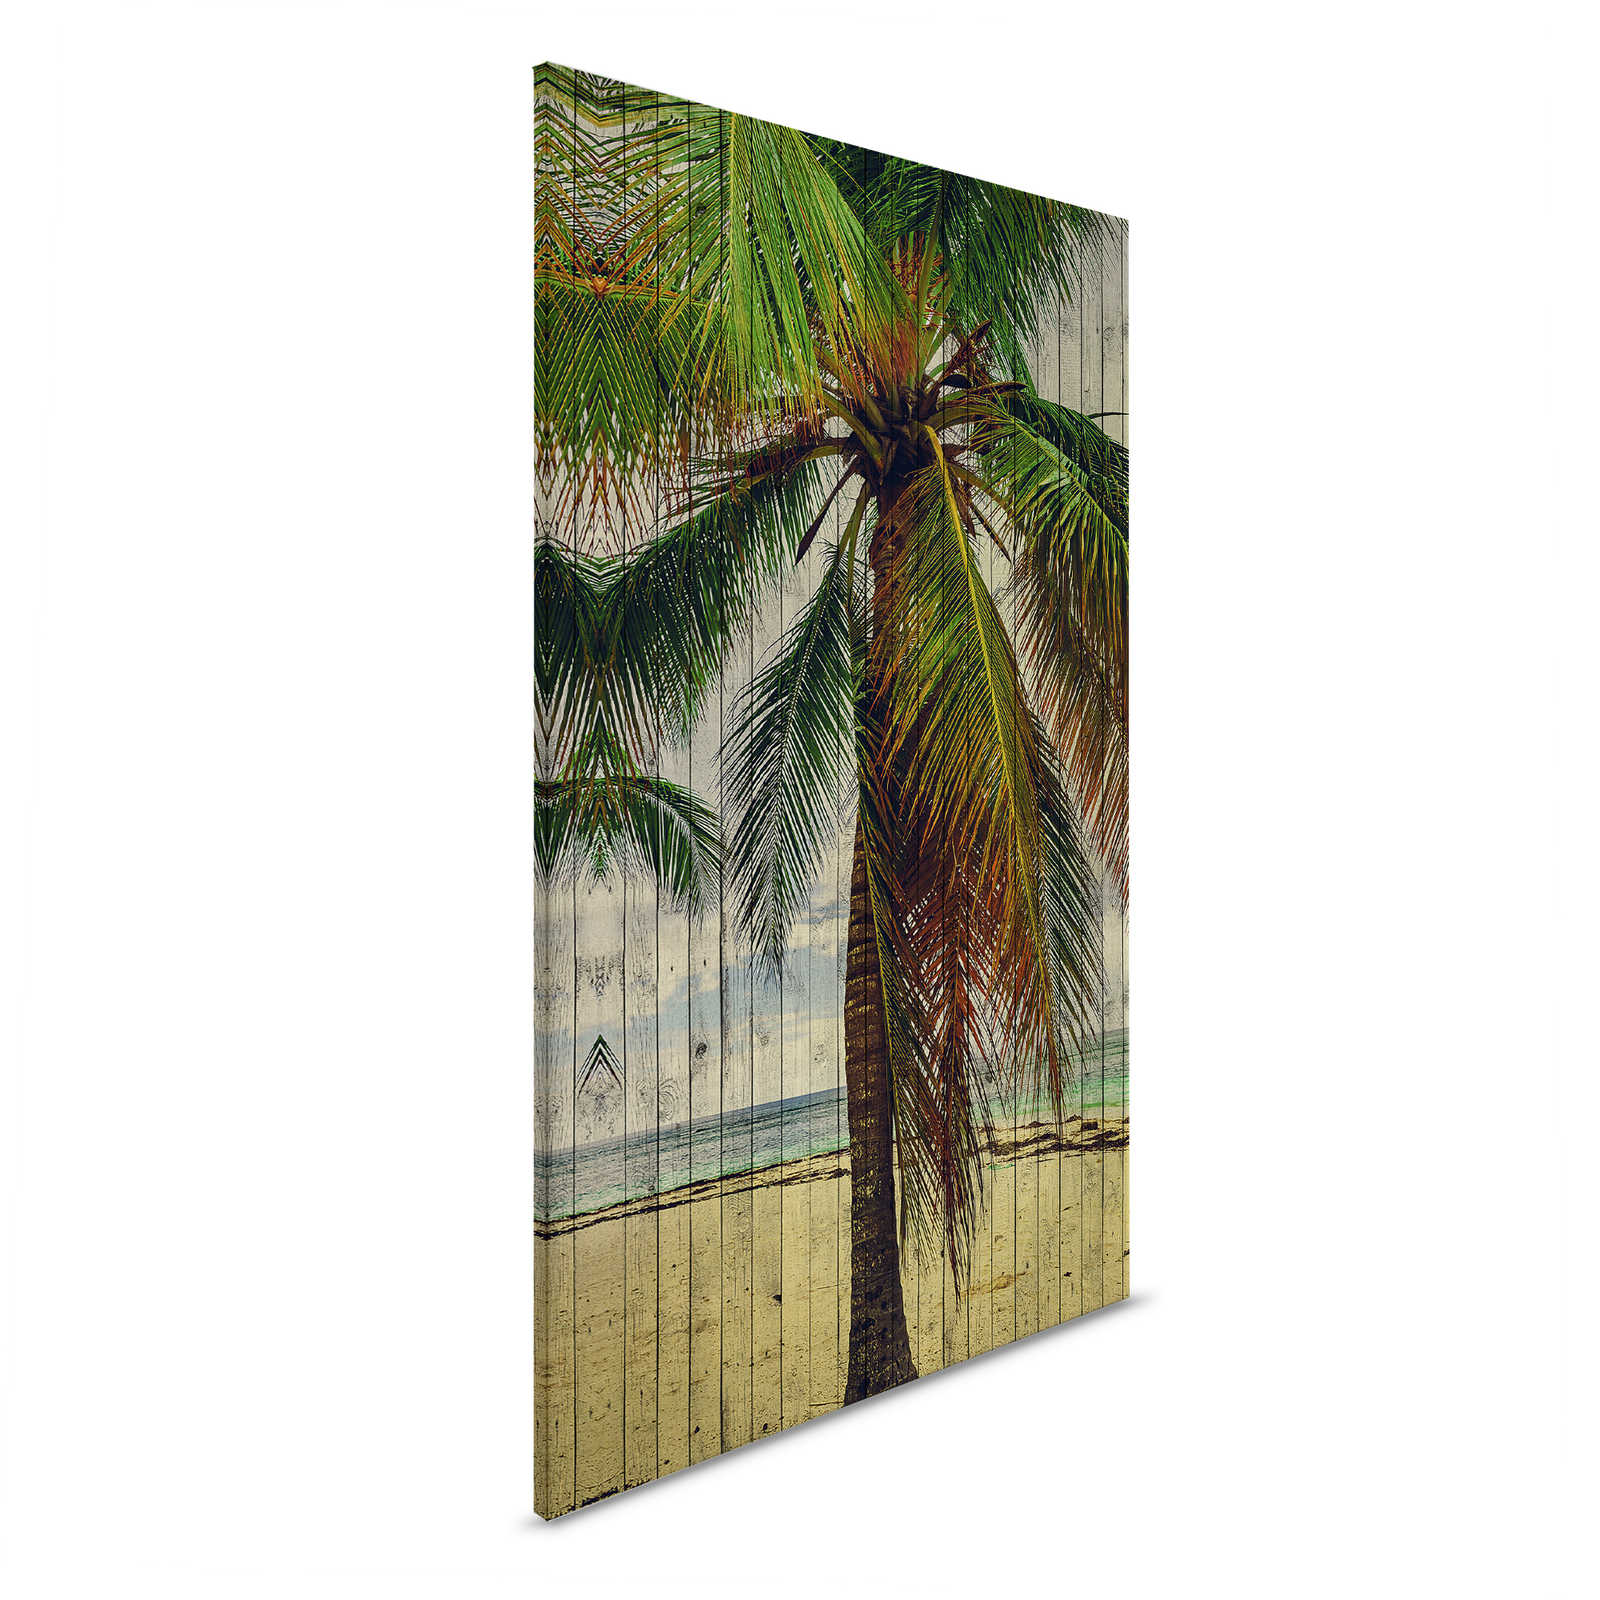         Tahiti 3 - Palm canvas picture with holiday feeling - wood panel structure - 0.60 m x 0.90 m
    